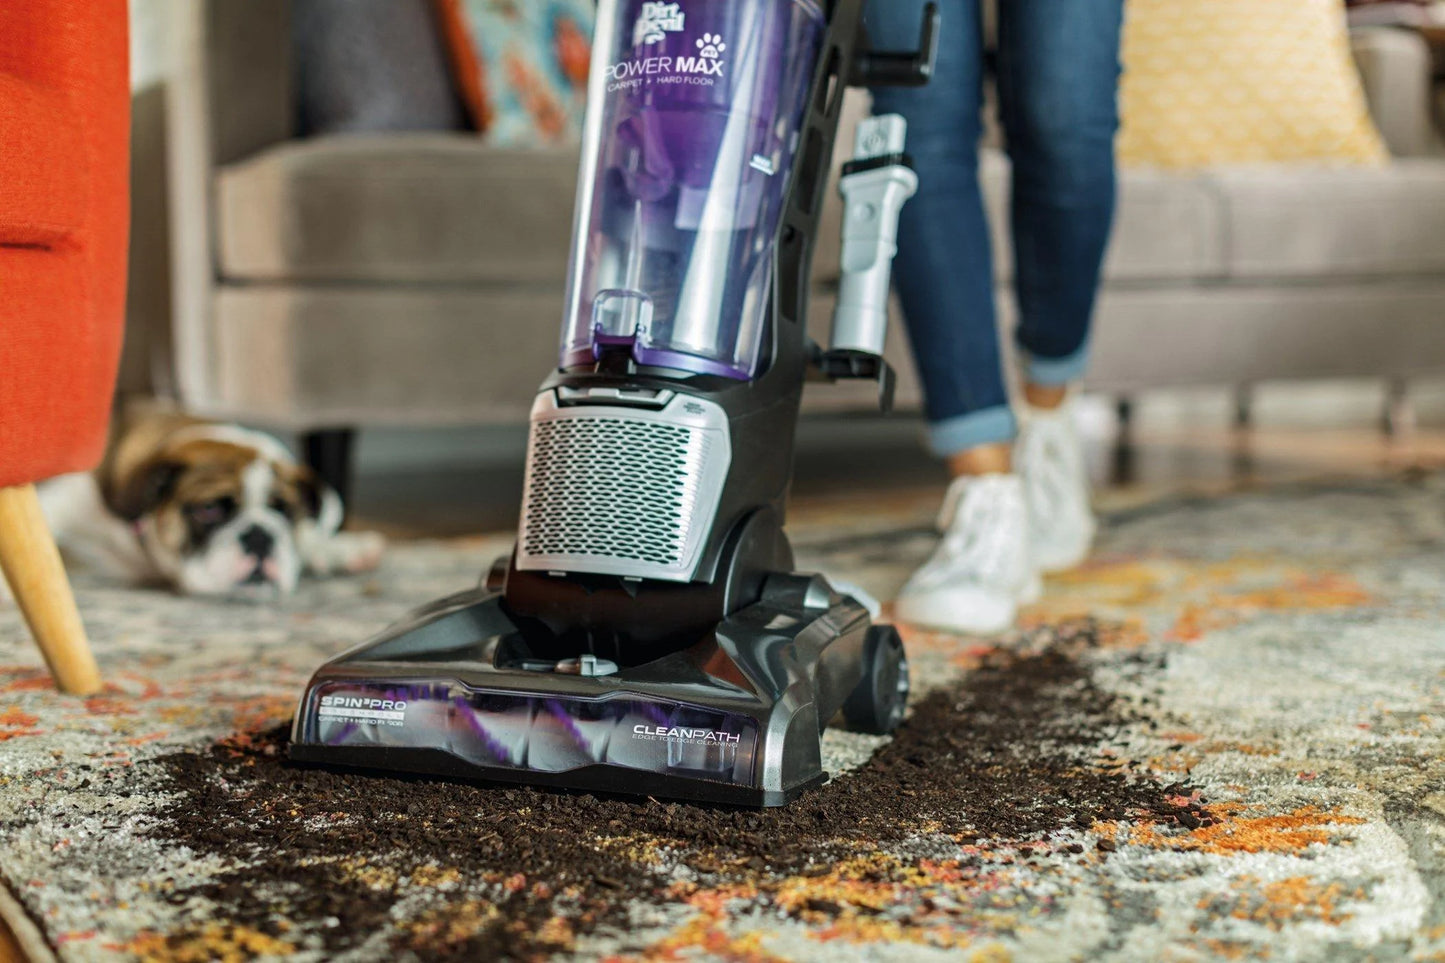 A purple and grey pet vacuum cleans up spilled soil from a plant off of a carpet